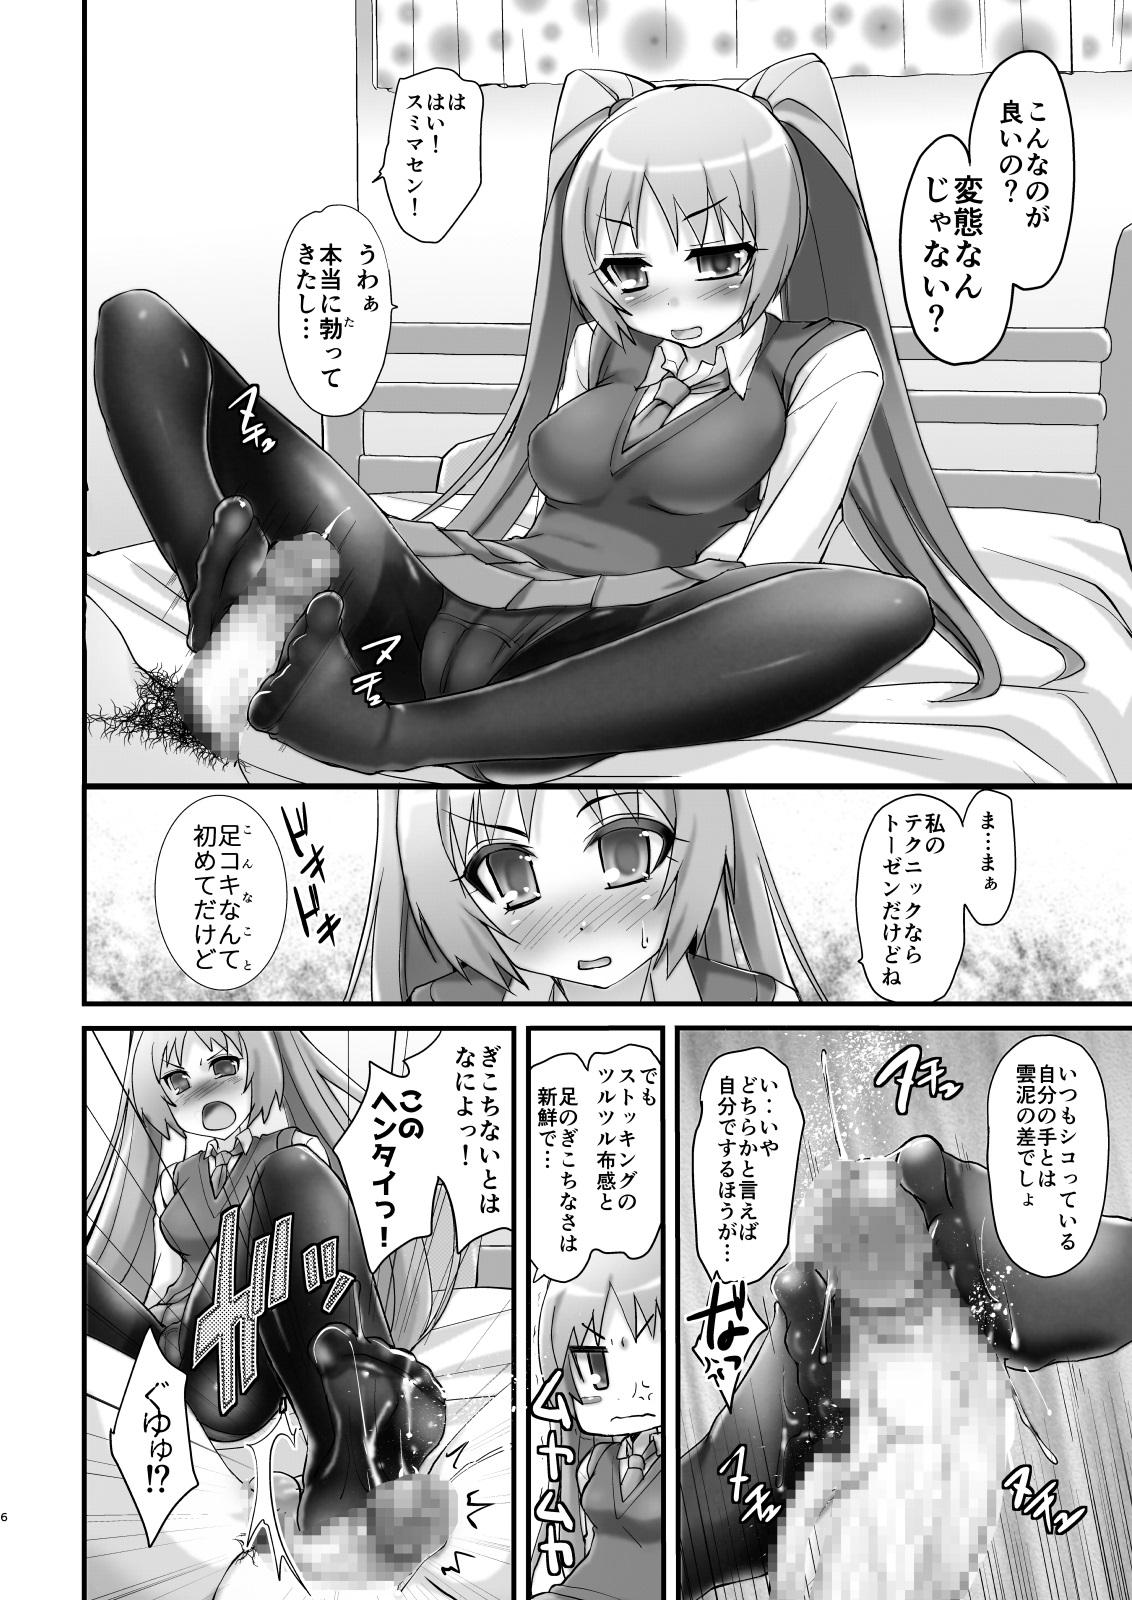 Wank Tsundere Tights to Twintails - Original Cumfacial - Page 6